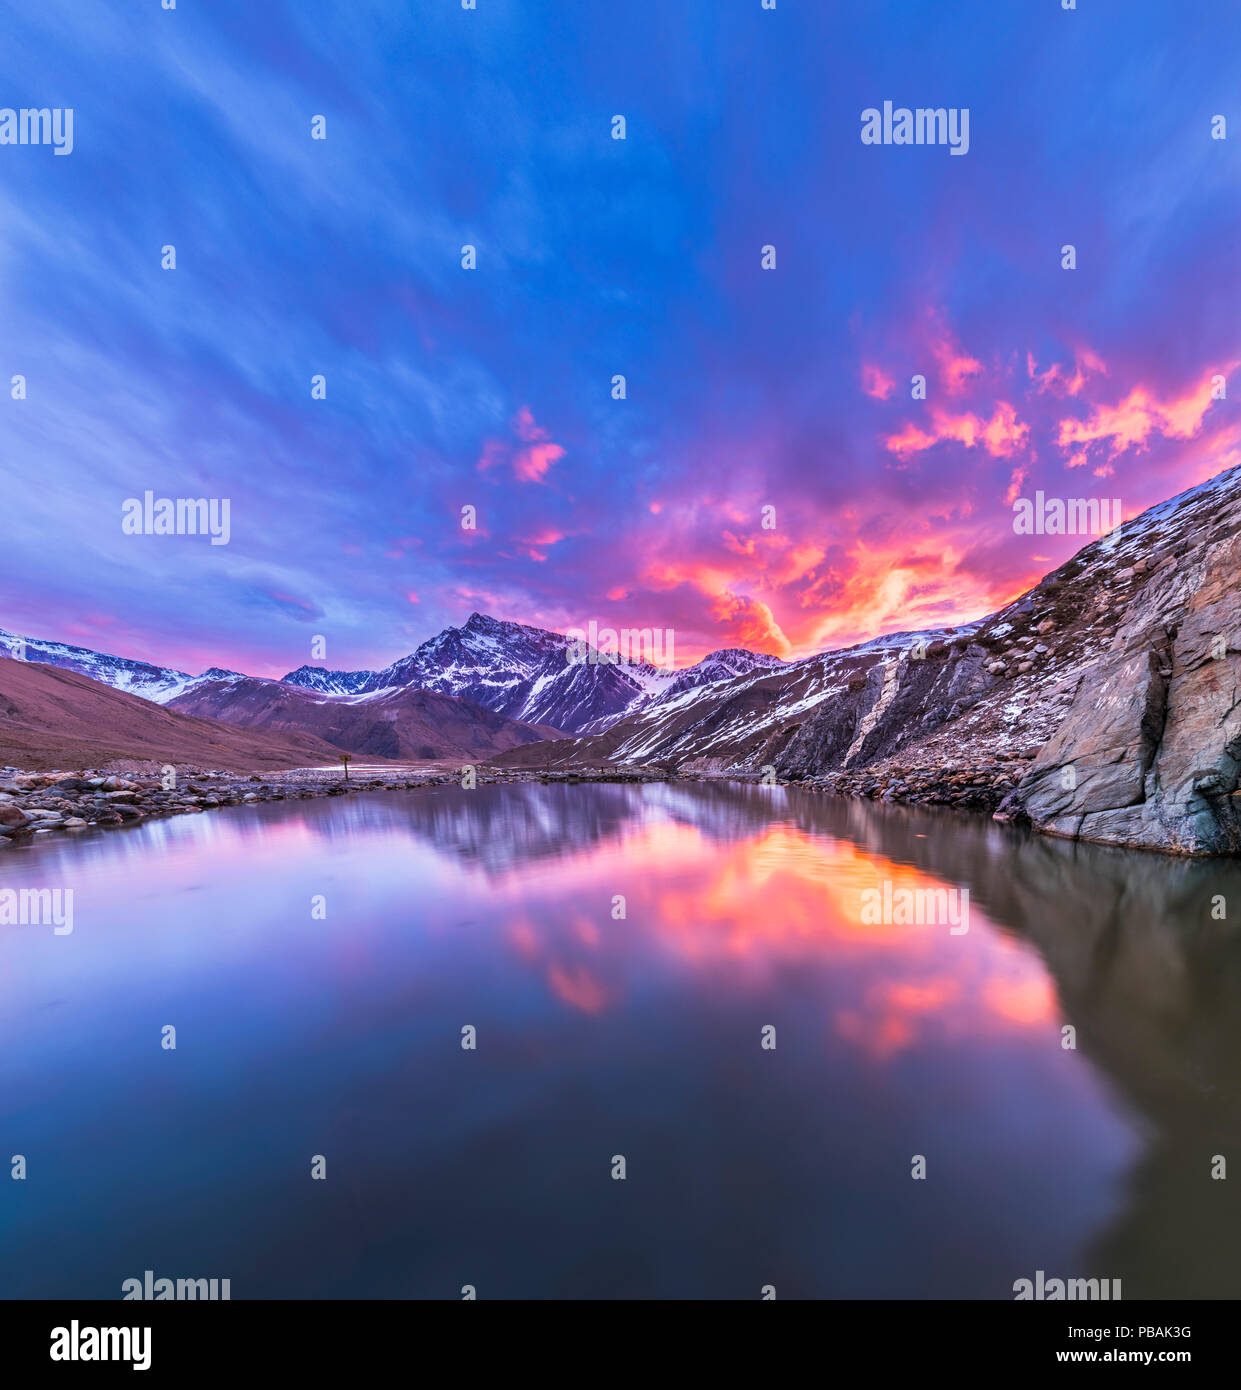 Thermal waters at Termas del Plomo inside Central Andes mountains. Just an amazing view of reflections and colors from the dawn and and an alpine view Stock Photo